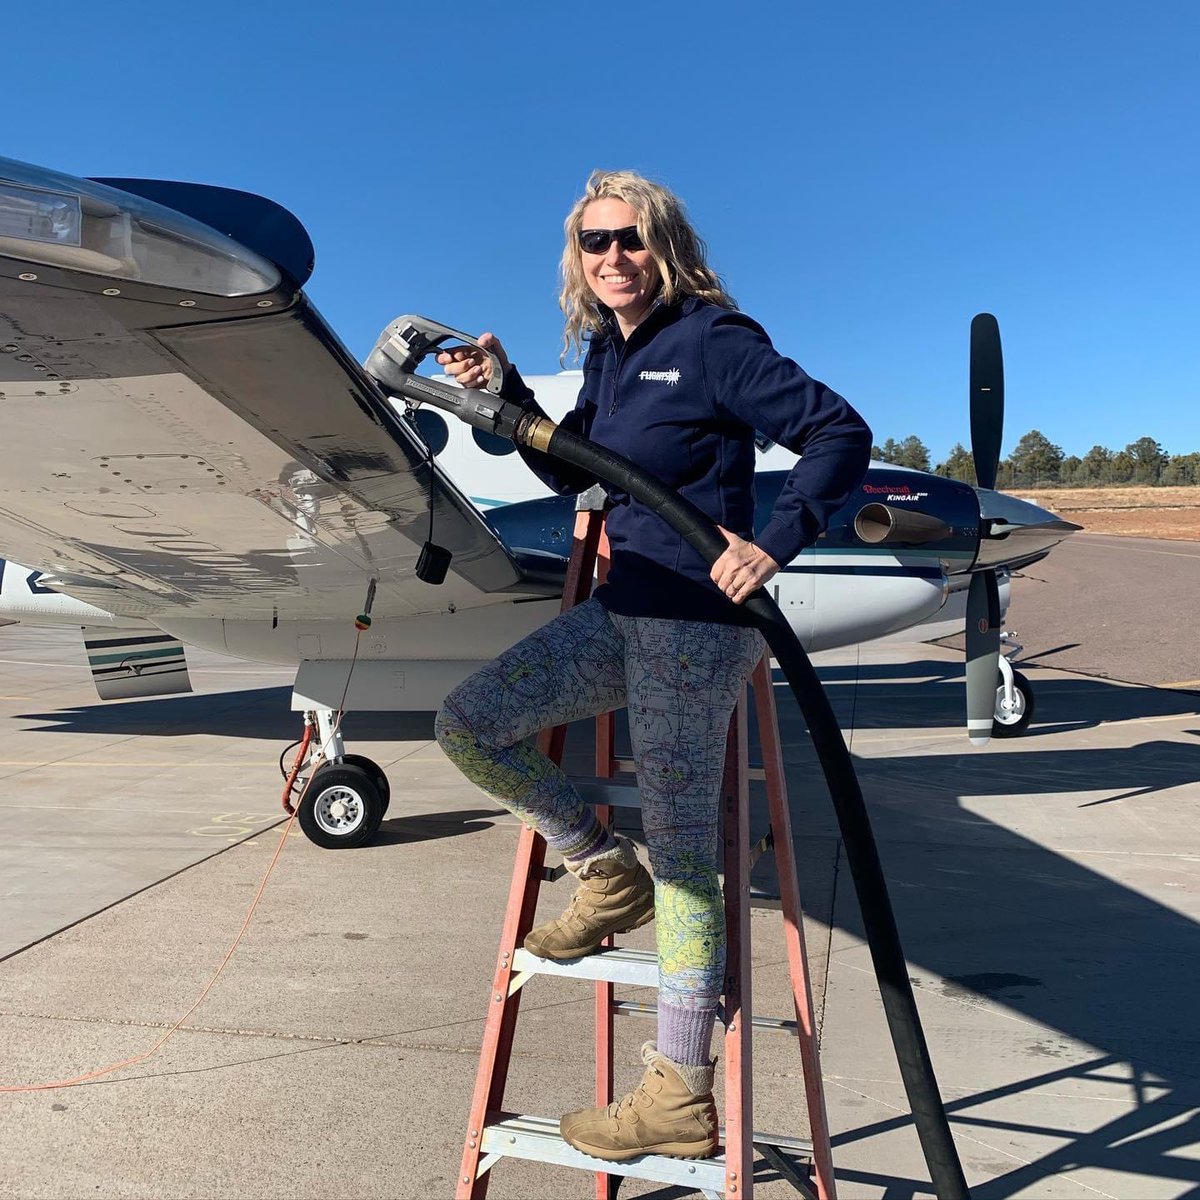 Fueling up for the next adventure! 😎 #ChartItFlyItWearIt #aviation #flying 📸: @pilotchristy on Instagram